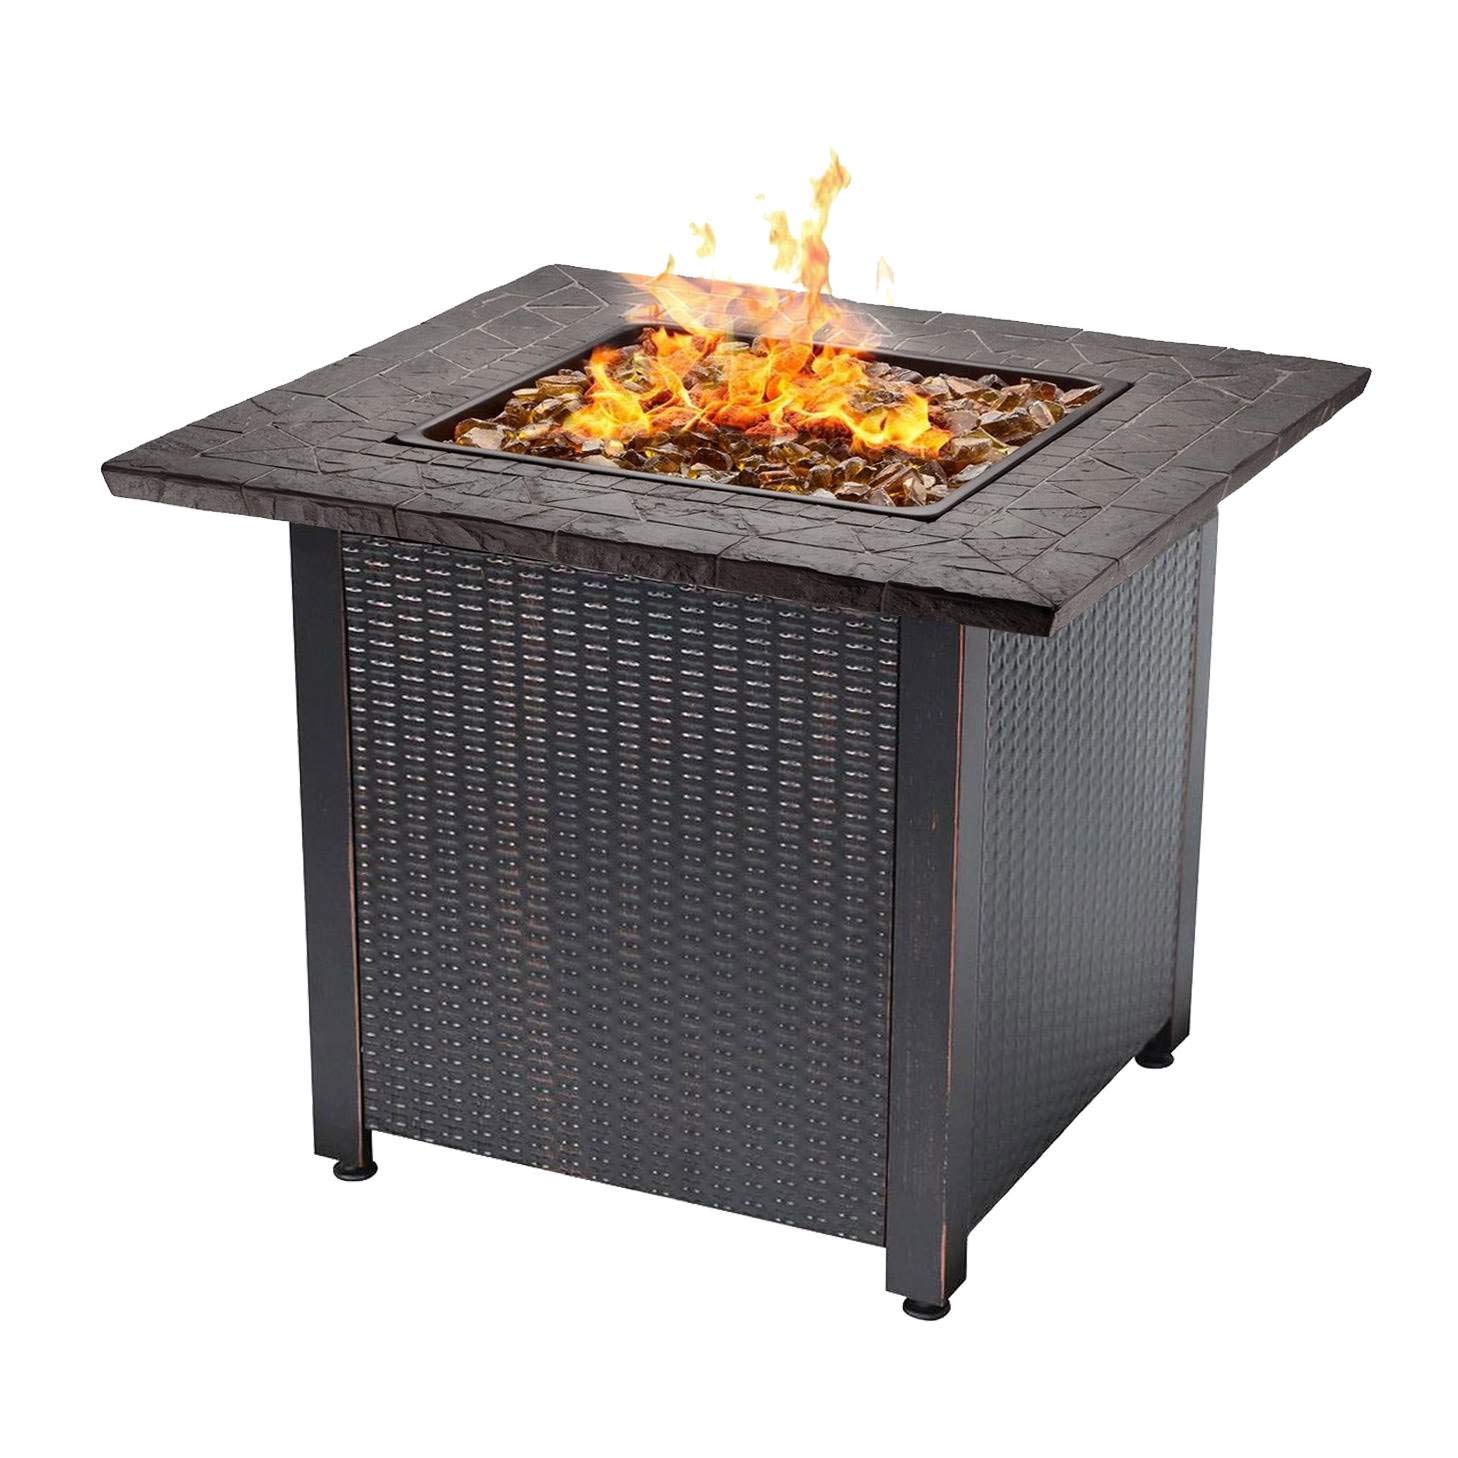 Endless Summer Outdoor Fireplace Awesome Endless Summer Gad1401g Lp Gas Outdoor Fire Table Multicolor